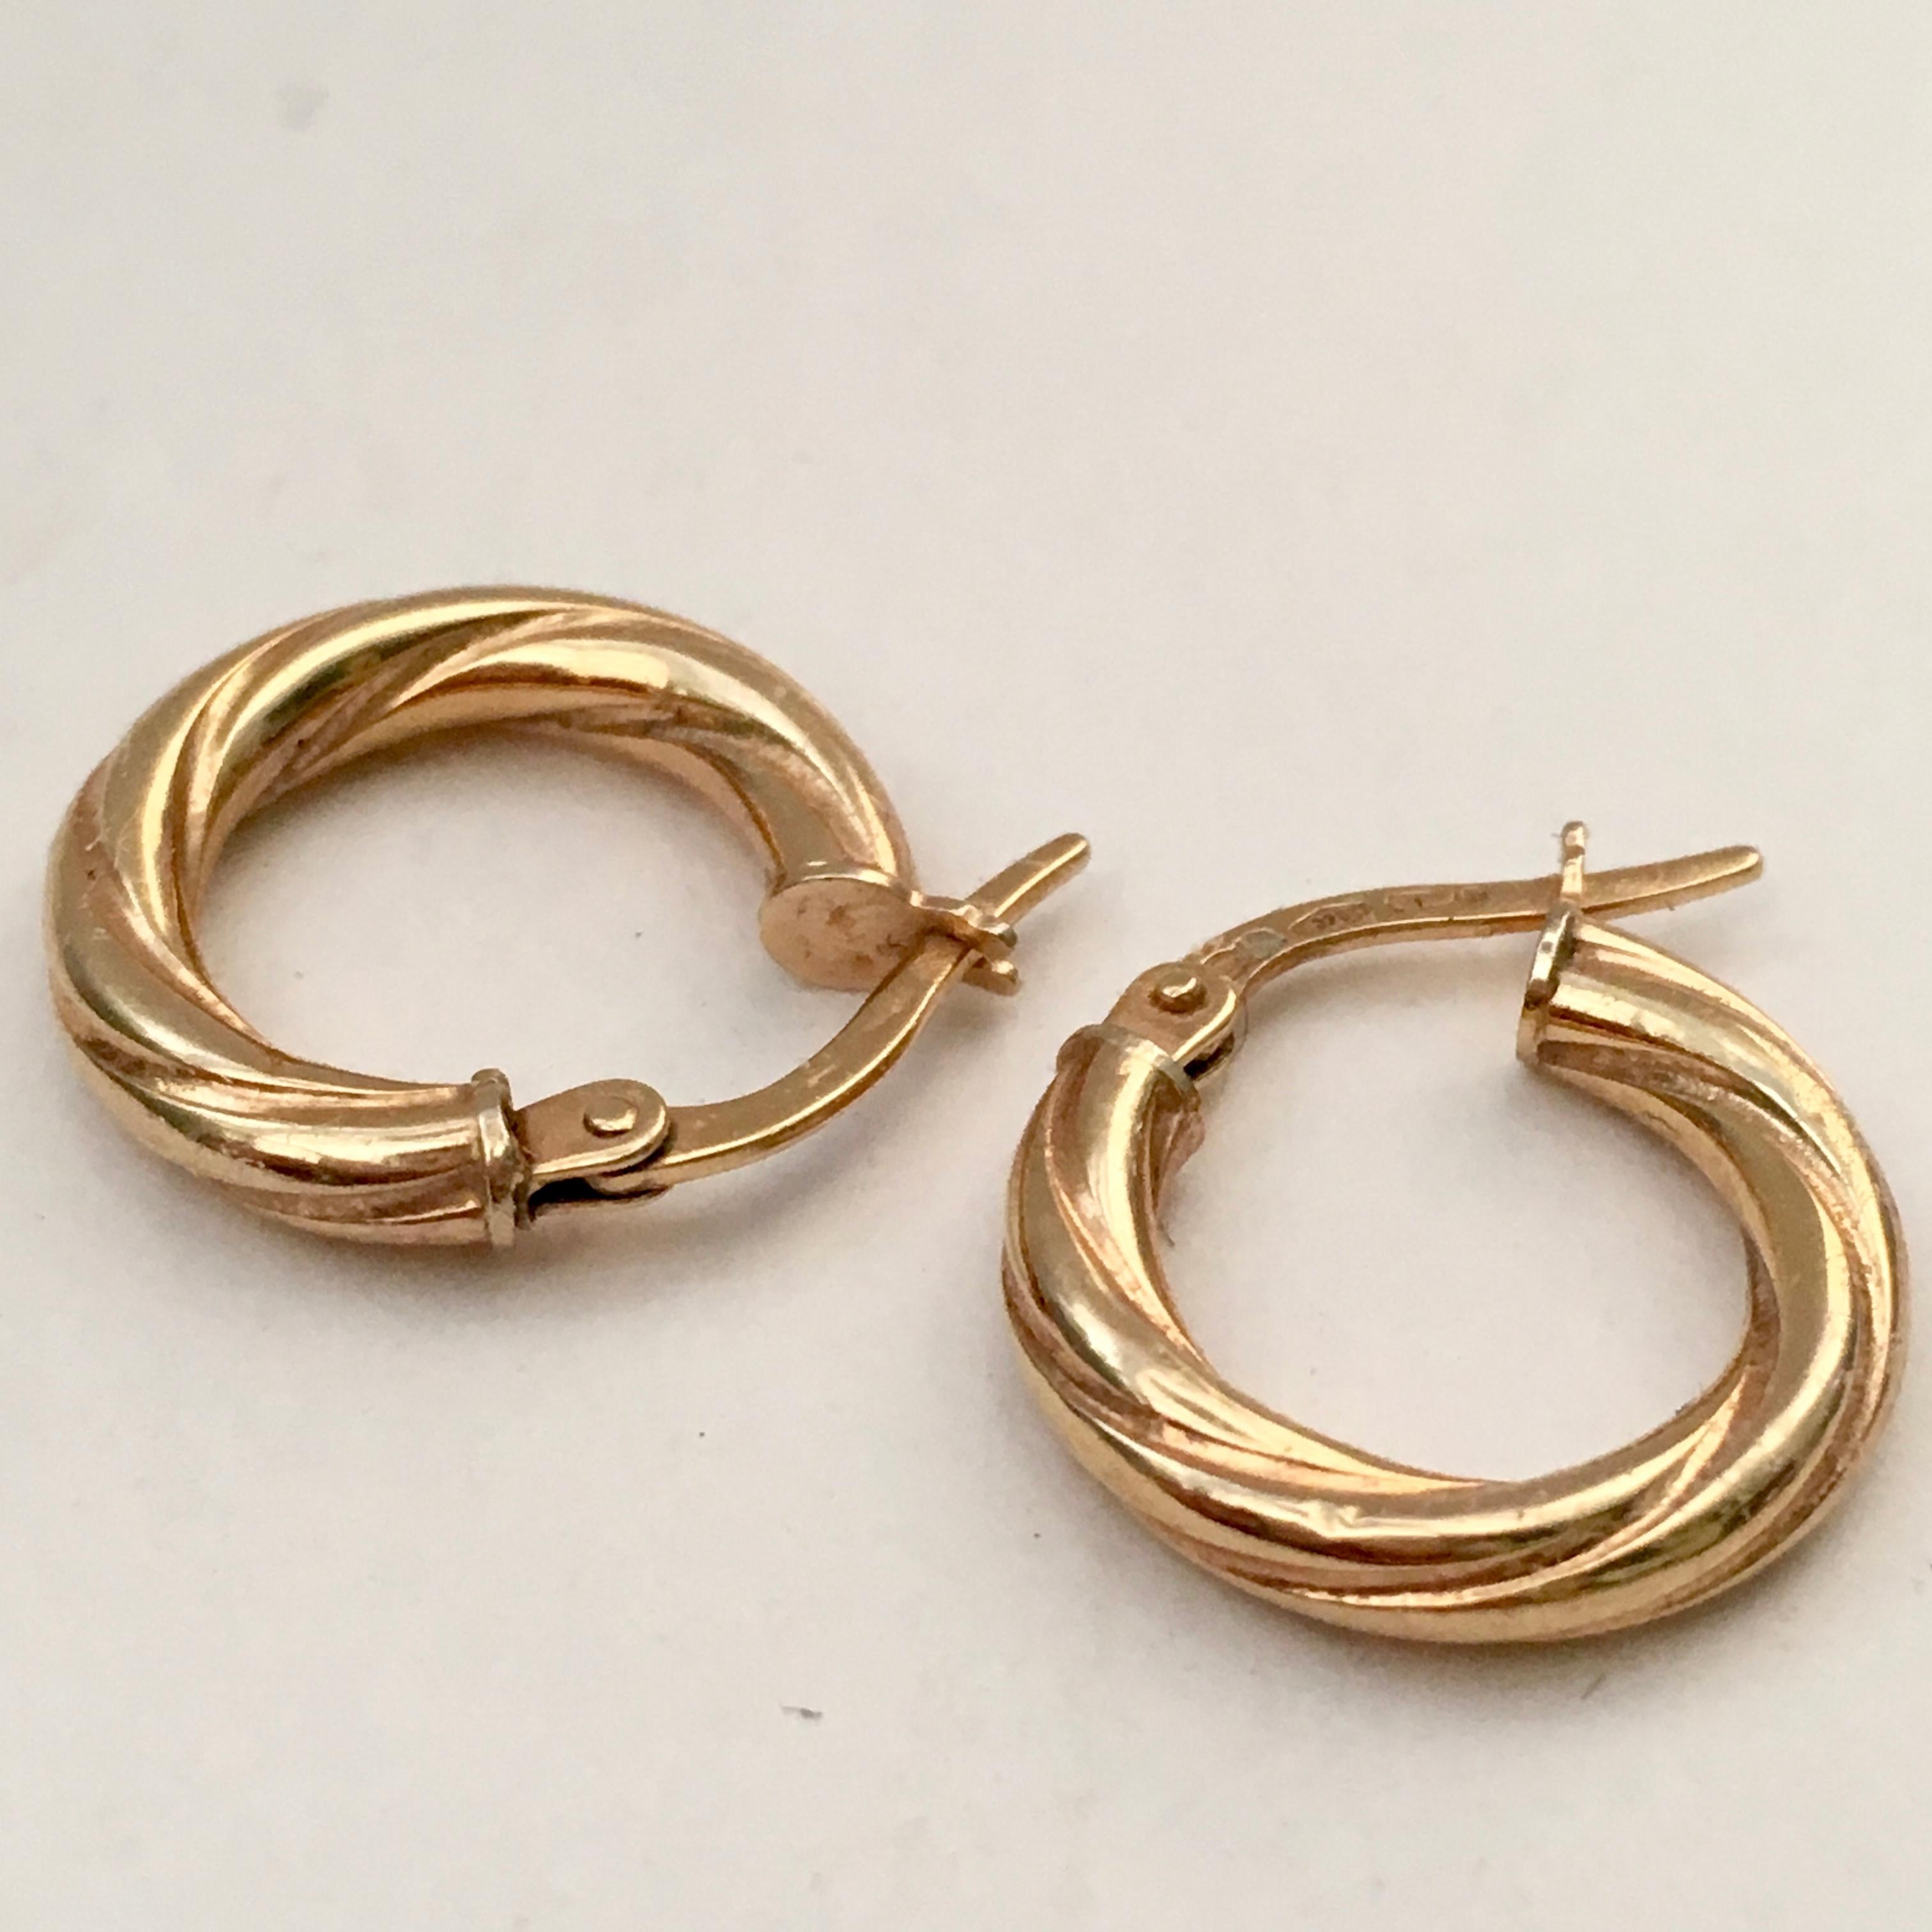 Contemporary Vintage Gold Hoops Small Twisted Braided Hoop Earrings Yellow Gold For Sale